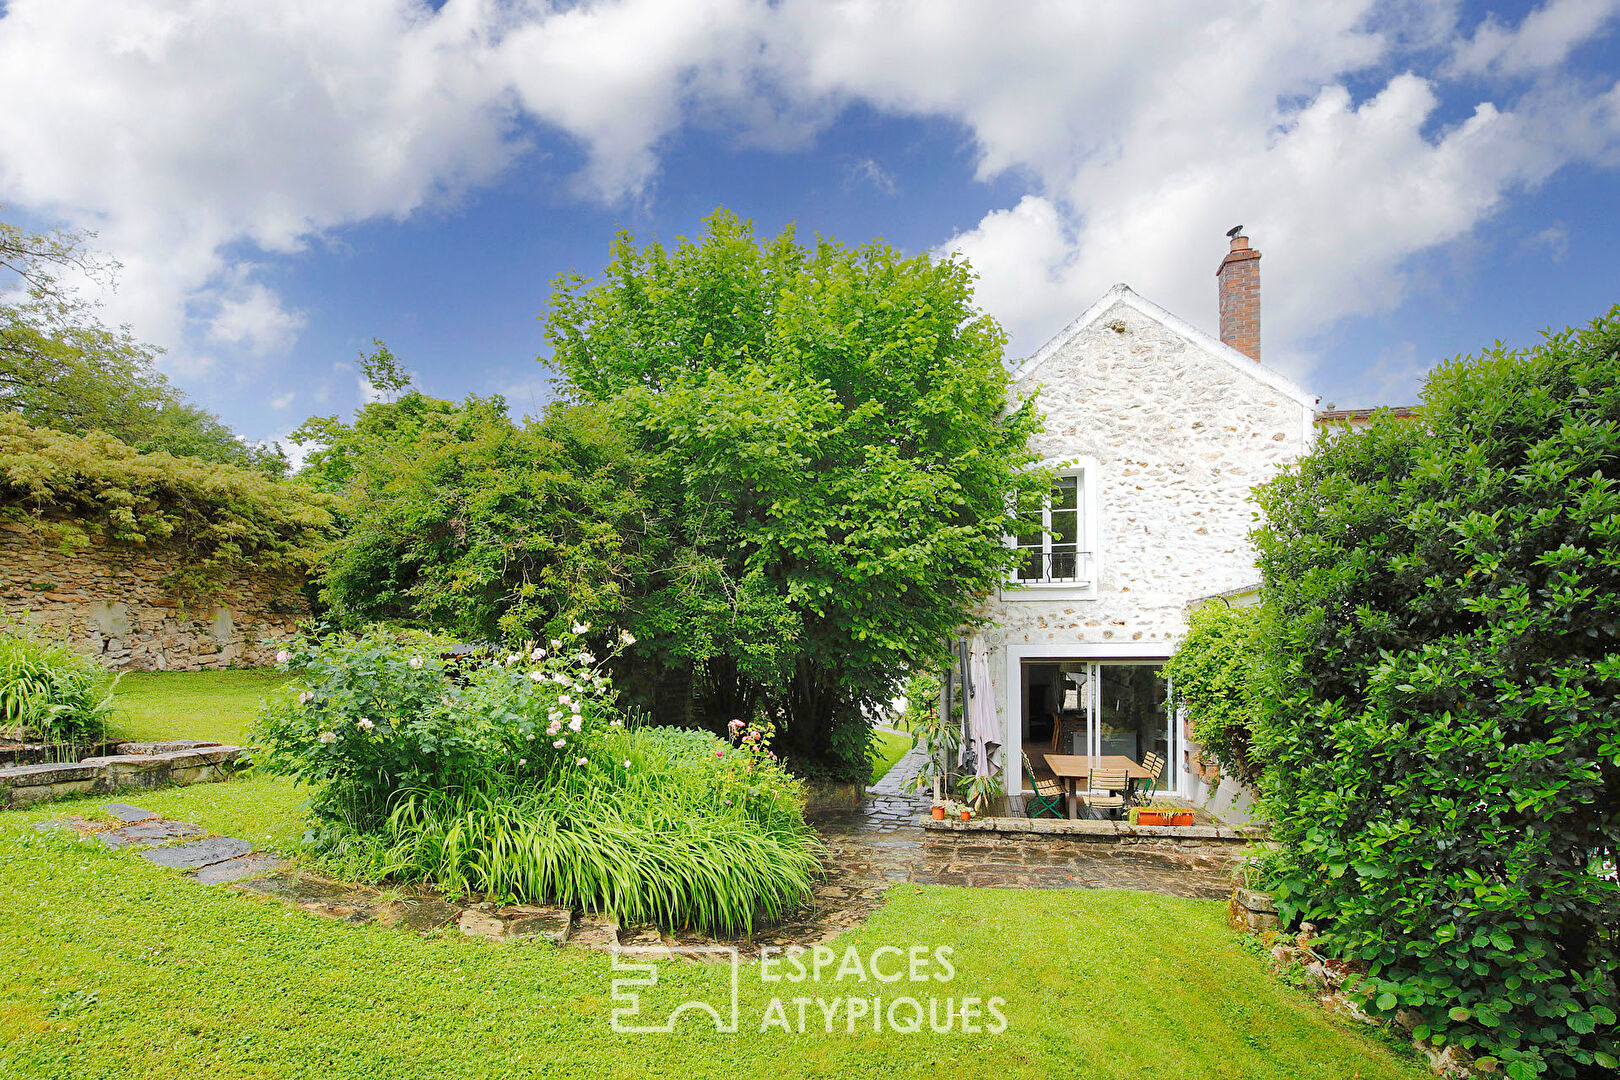 Charming property with landscaped garden and outbuildings